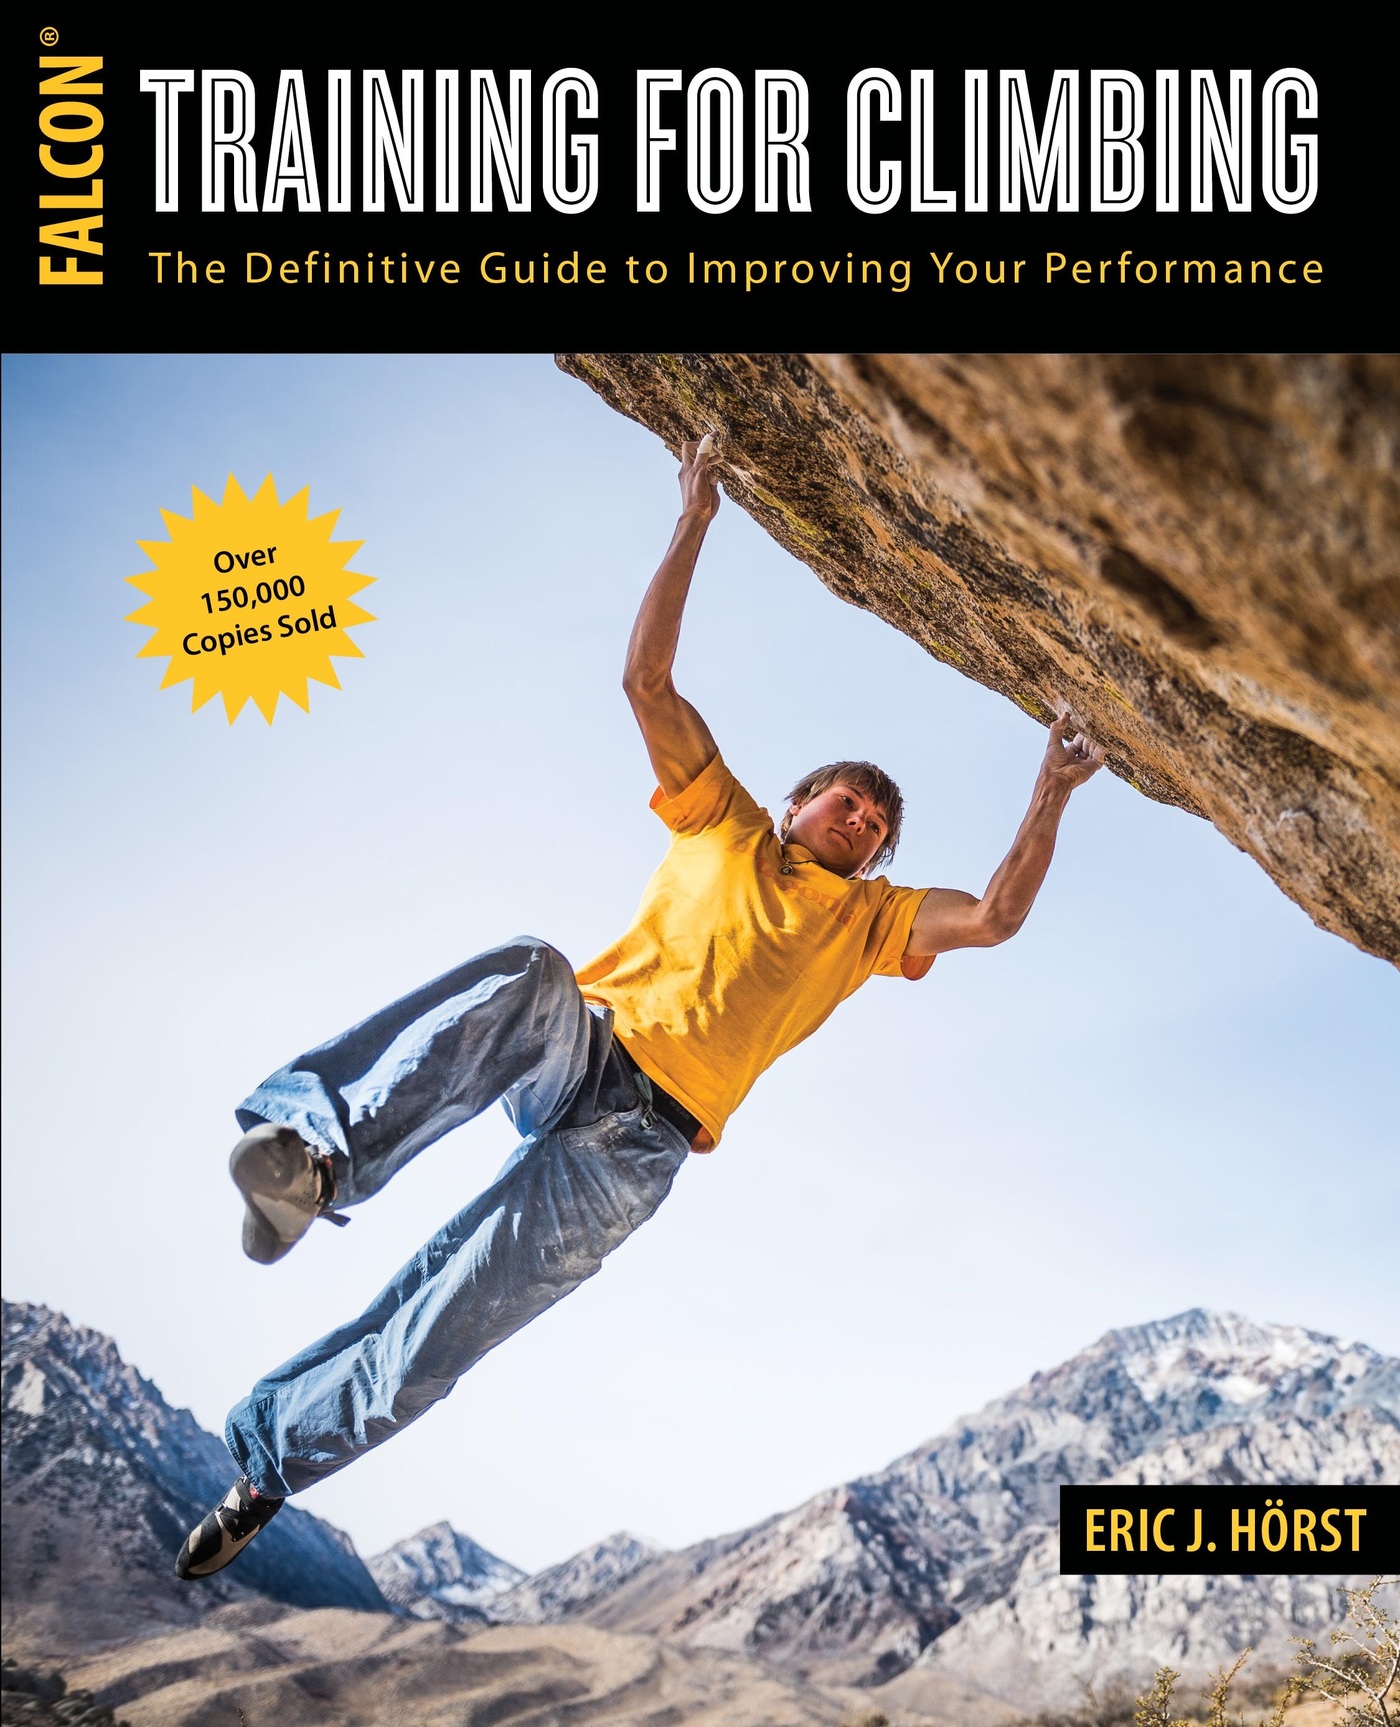 Eric J. Hörst, Training for Climbing: The Definitive Guide to Improving Your Performance (How To Climb Series), 3rd ed. Guilford: Falcon Guides,  2016, 352 pp.